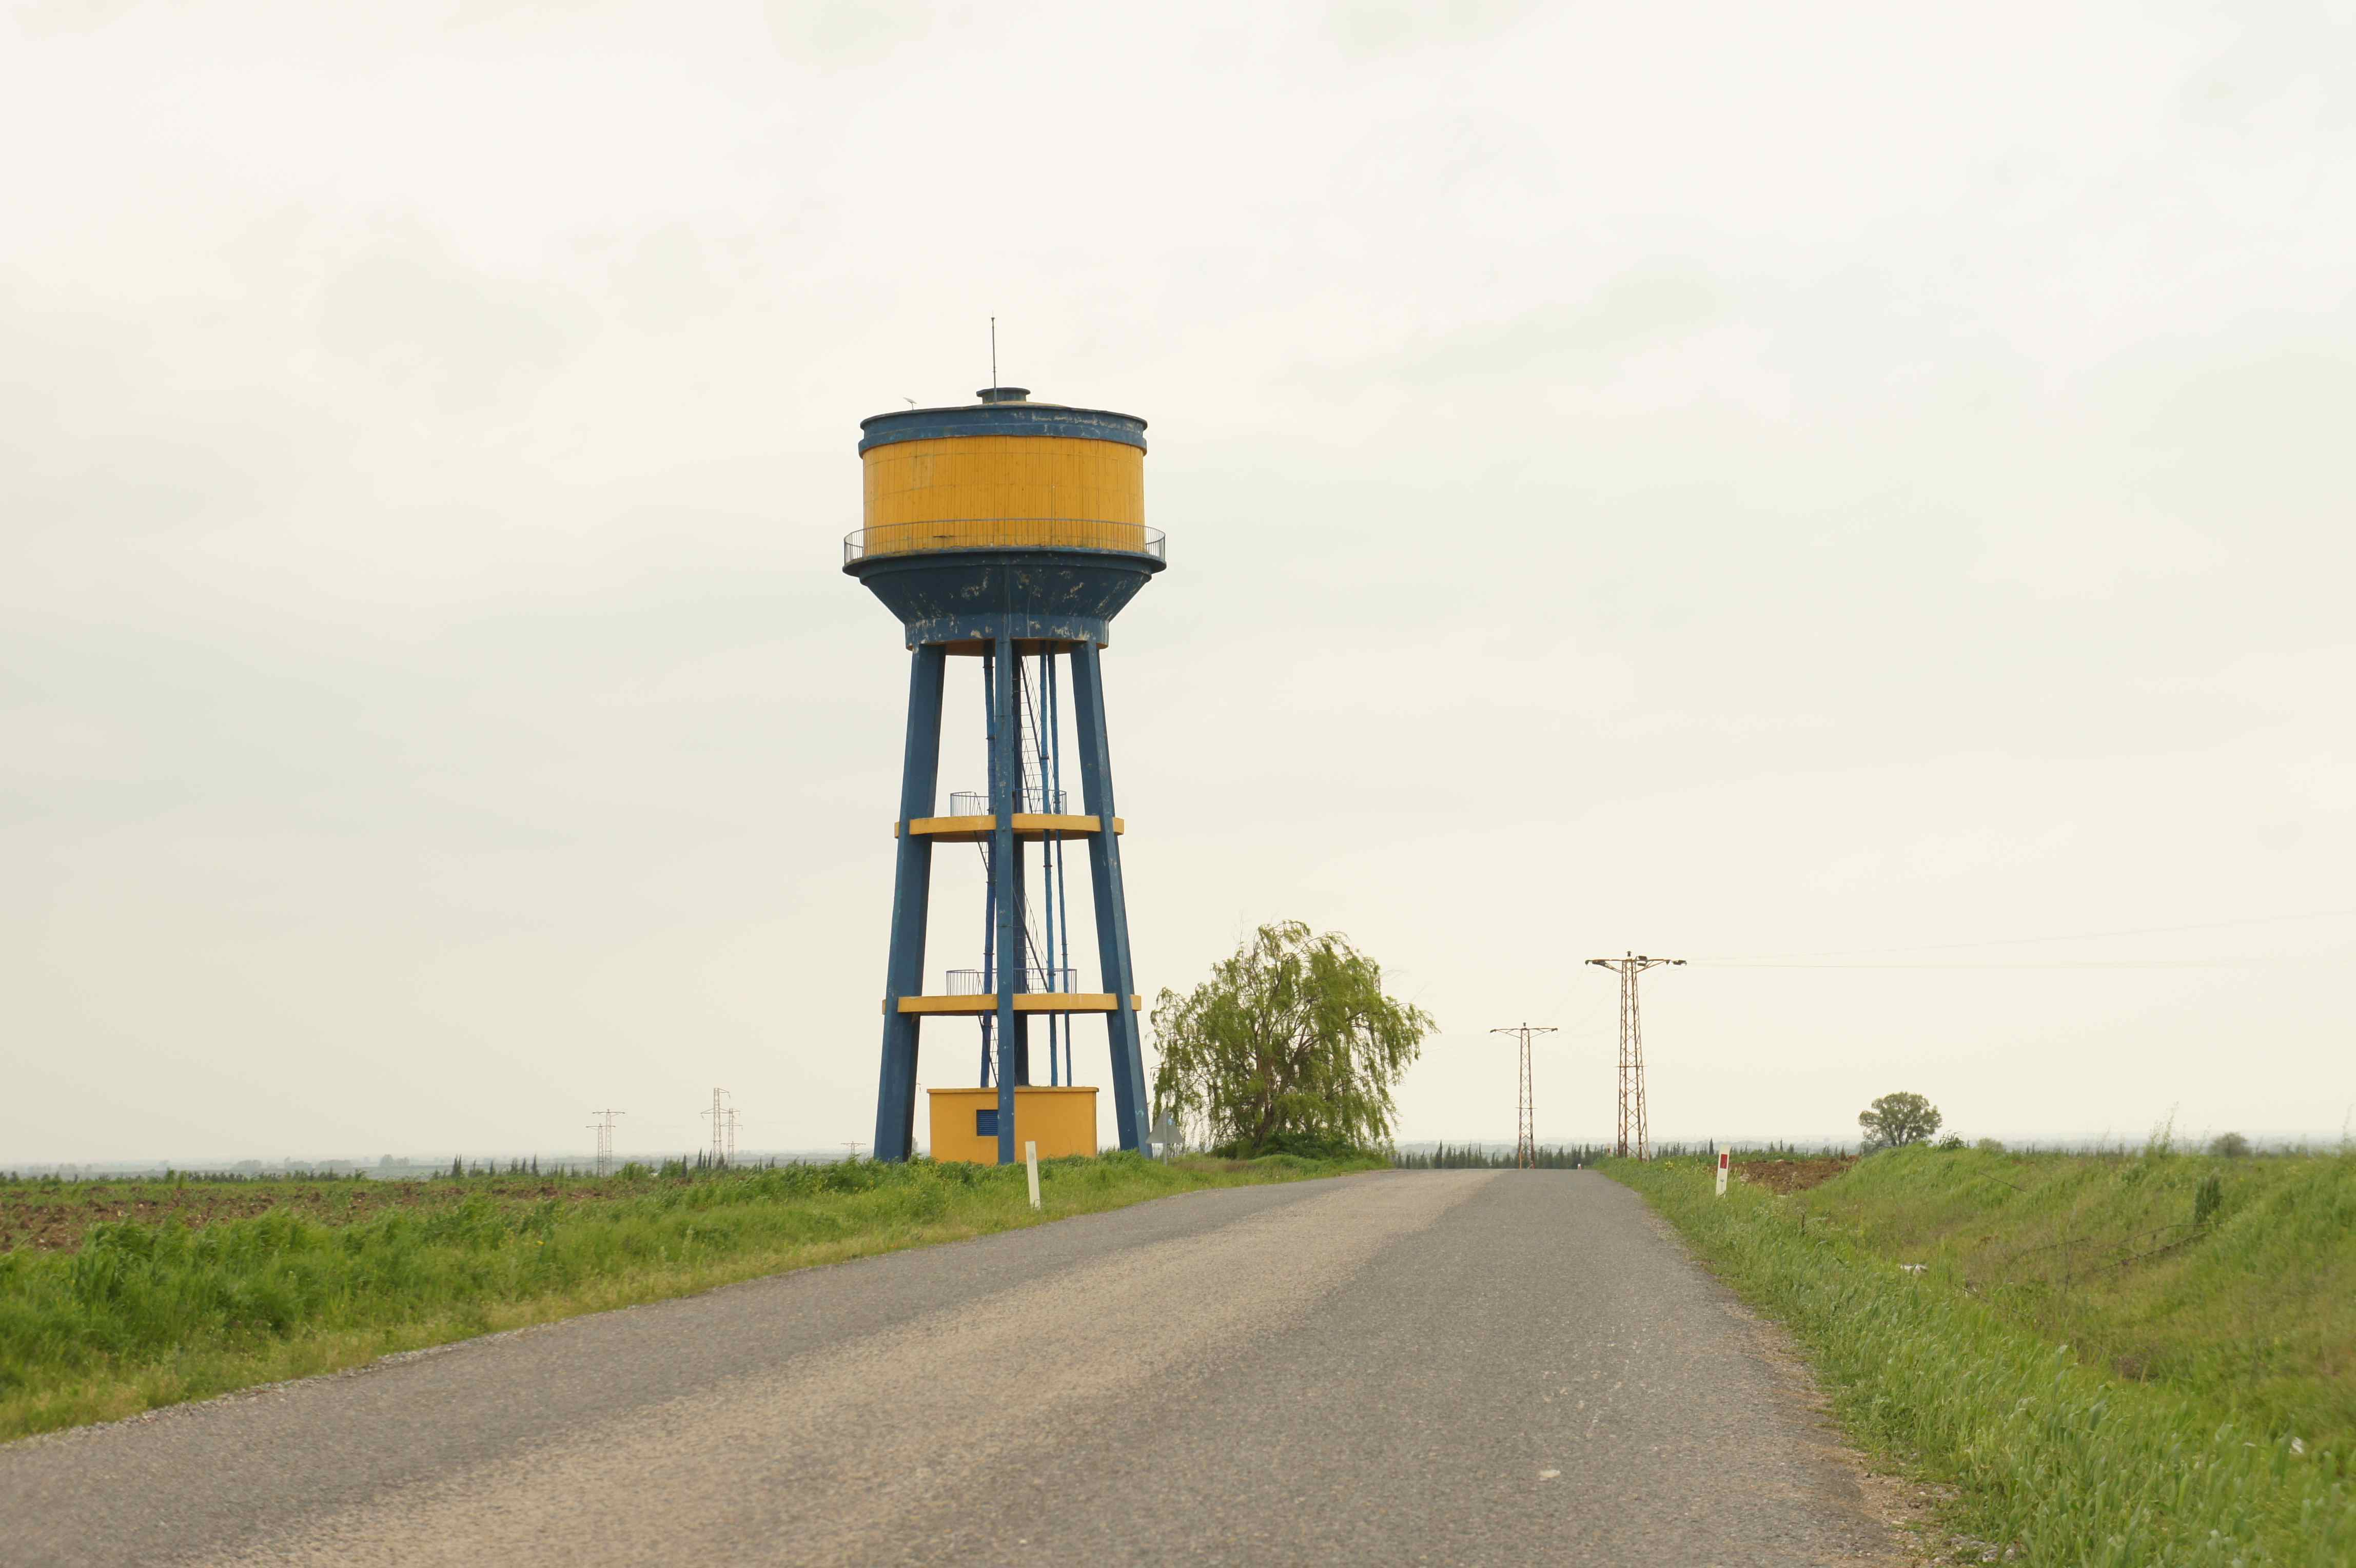 Swedish water tower on the turkish countryside, or is it maybe the latest kind of Ikea store